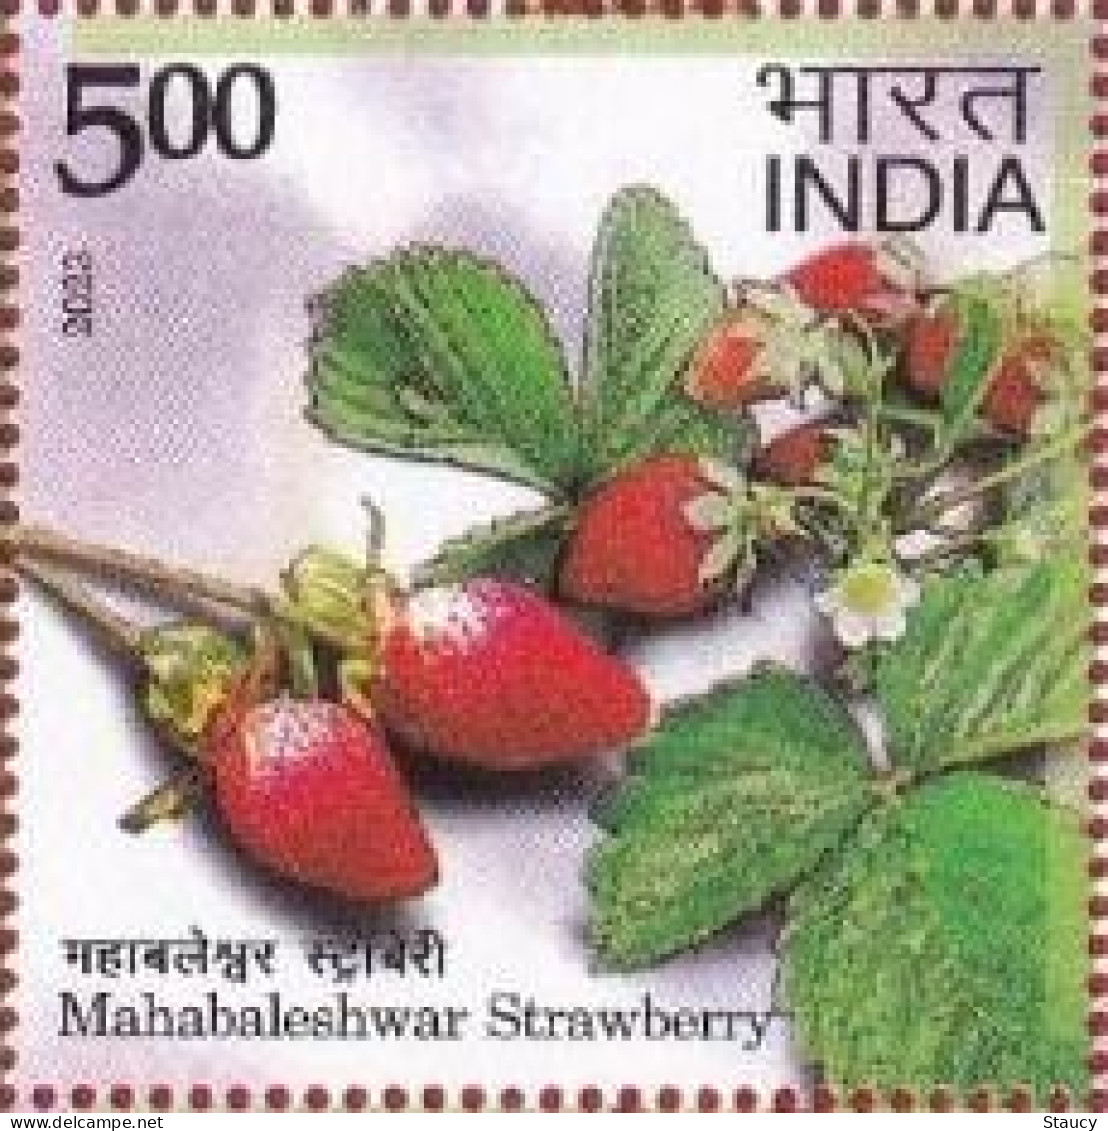 India 2023 Agricultural Goods Of India -- Geographical Fruit - Mahabaleshwar Strawberry 1v Rs.5.00 Stamp MNH As Per Scan - Agriculture